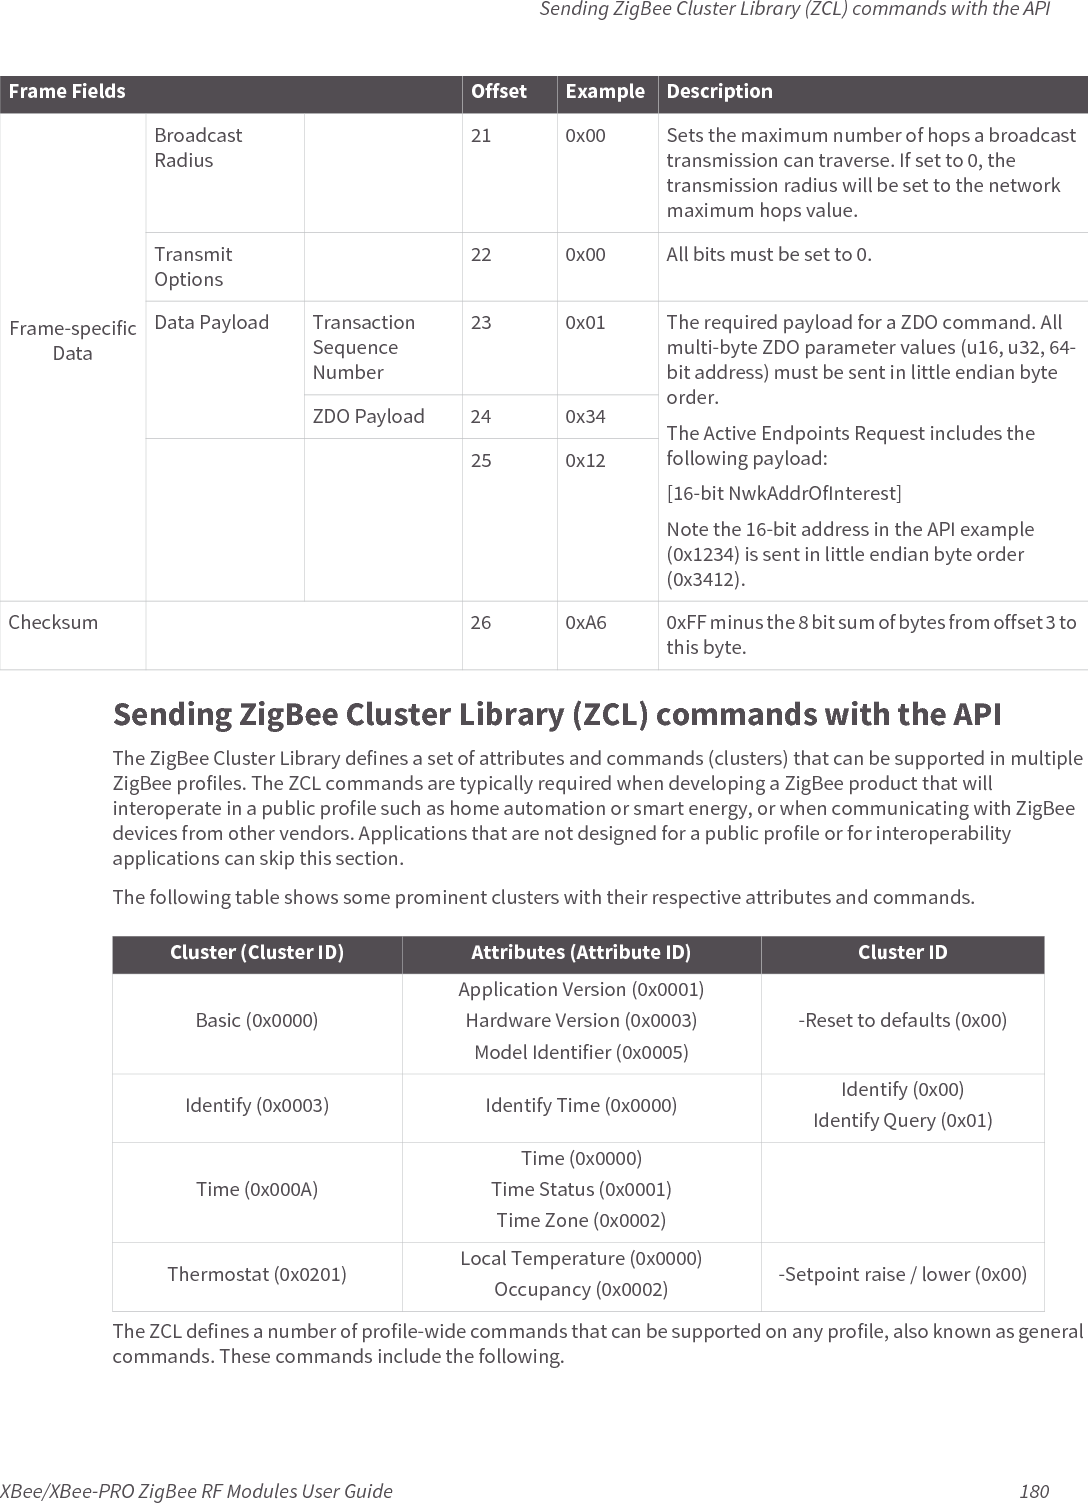 Sending ZigBee Cluster Library (ZCL) commands with the APIXBee/XBee-PRO ZigBee RF Modules User Guide 180Sending ZigBee Cluster Library (ZCL) commands with the APIThe ZigBee Cluster Library defines a set of attributes and commands (clusters) that can be supported in multiple ZigBee profiles. The ZCL commands are typically required when developing a ZigBee product that will interoperate in a public profile such as home automation or smart energy, or when communicating with ZigBee devices from other vendors. Applications that are not designed for a public profile or for interoperability applications can skip this section.The following table shows some prominent clusters with their respective attributes and commands.The ZCL defines a number of profile-wide commands that can be supported on any profile, also known as general commands. These commands include the following.Frame-specific Data Broadcast Radius21 0x00 Sets the maximum number of hops a broadcast transmission can traverse. If set to 0, the transmission radius will be set to the network maximum hops value.Transmit Options22 0x00 All bits must be set to 0.Data Payload Transaction Sequence Number23 0x01 The required payload for a ZDO command. All multi-byte ZDO parameter values (u16, u32, 64-bit address) must be sent in little endian byte order.The Active Endpoints Request includes the following payload:[16-bit NwkAddrOfInterest]Note the 16-bit address in the API example (0x1234) is sent in little endian byte order (0x3412).ZDO Payload 24 0x3425 0x12Checksum 26 0xA6 0xFF minus the 8 bit sum of bytes from offset 3 to this byte.Frame Fields Offset Example DescriptionCluster (Cluster ID) Attributes (Attribute ID) Cluster IDBasic (0x0000)Application Version (0x0001)Hardware Version (0x0003)Model Identifier (0x0005)-Reset to defaults (0x00)Identify (0x0003) Identify Time (0x0000) Identify (0x00)Identify Query (0x01)Time (0x000A)Time (0x0000)Time Status (0x0001)Time Zone (0x0002)Thermostat (0x0201) Local Temperature (0x0000)Occupancy (0x0002) -Setpoint raise / lower (0x00)